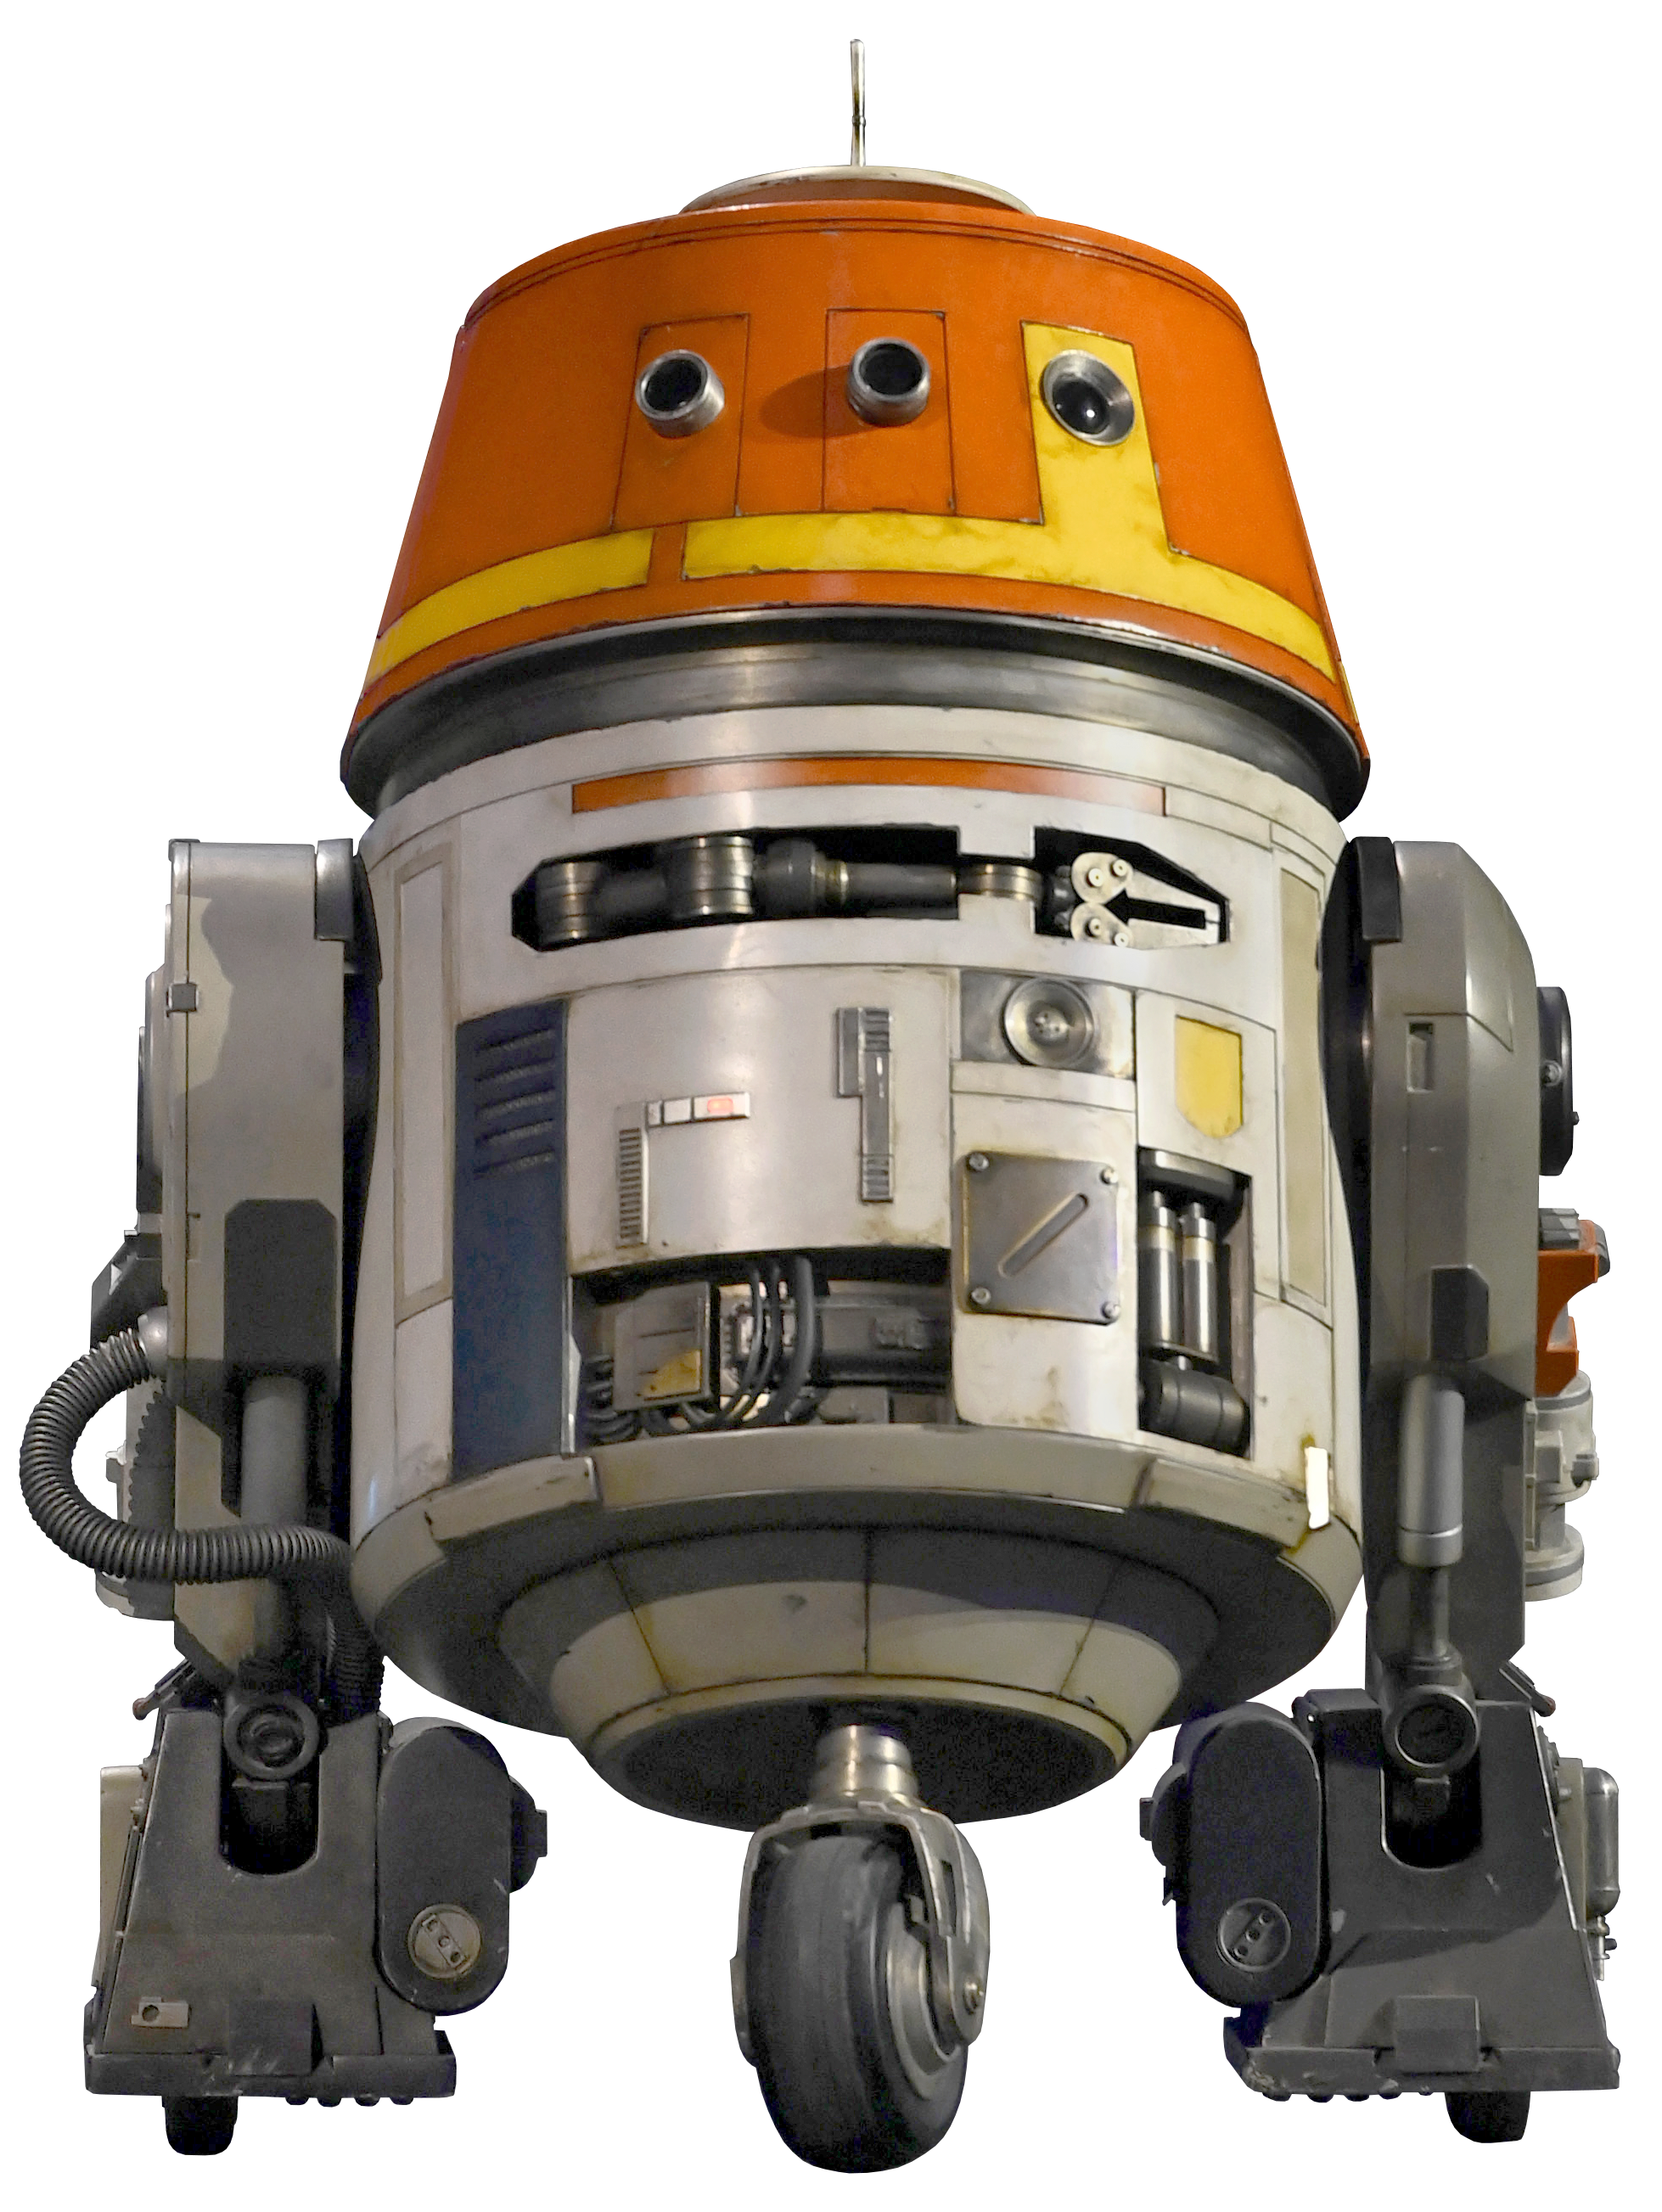 https://static.wikia.nocookie.net/starwars/images/b/bb/Chopper_Live_Action.png/revision/latest?cb=20230620225311